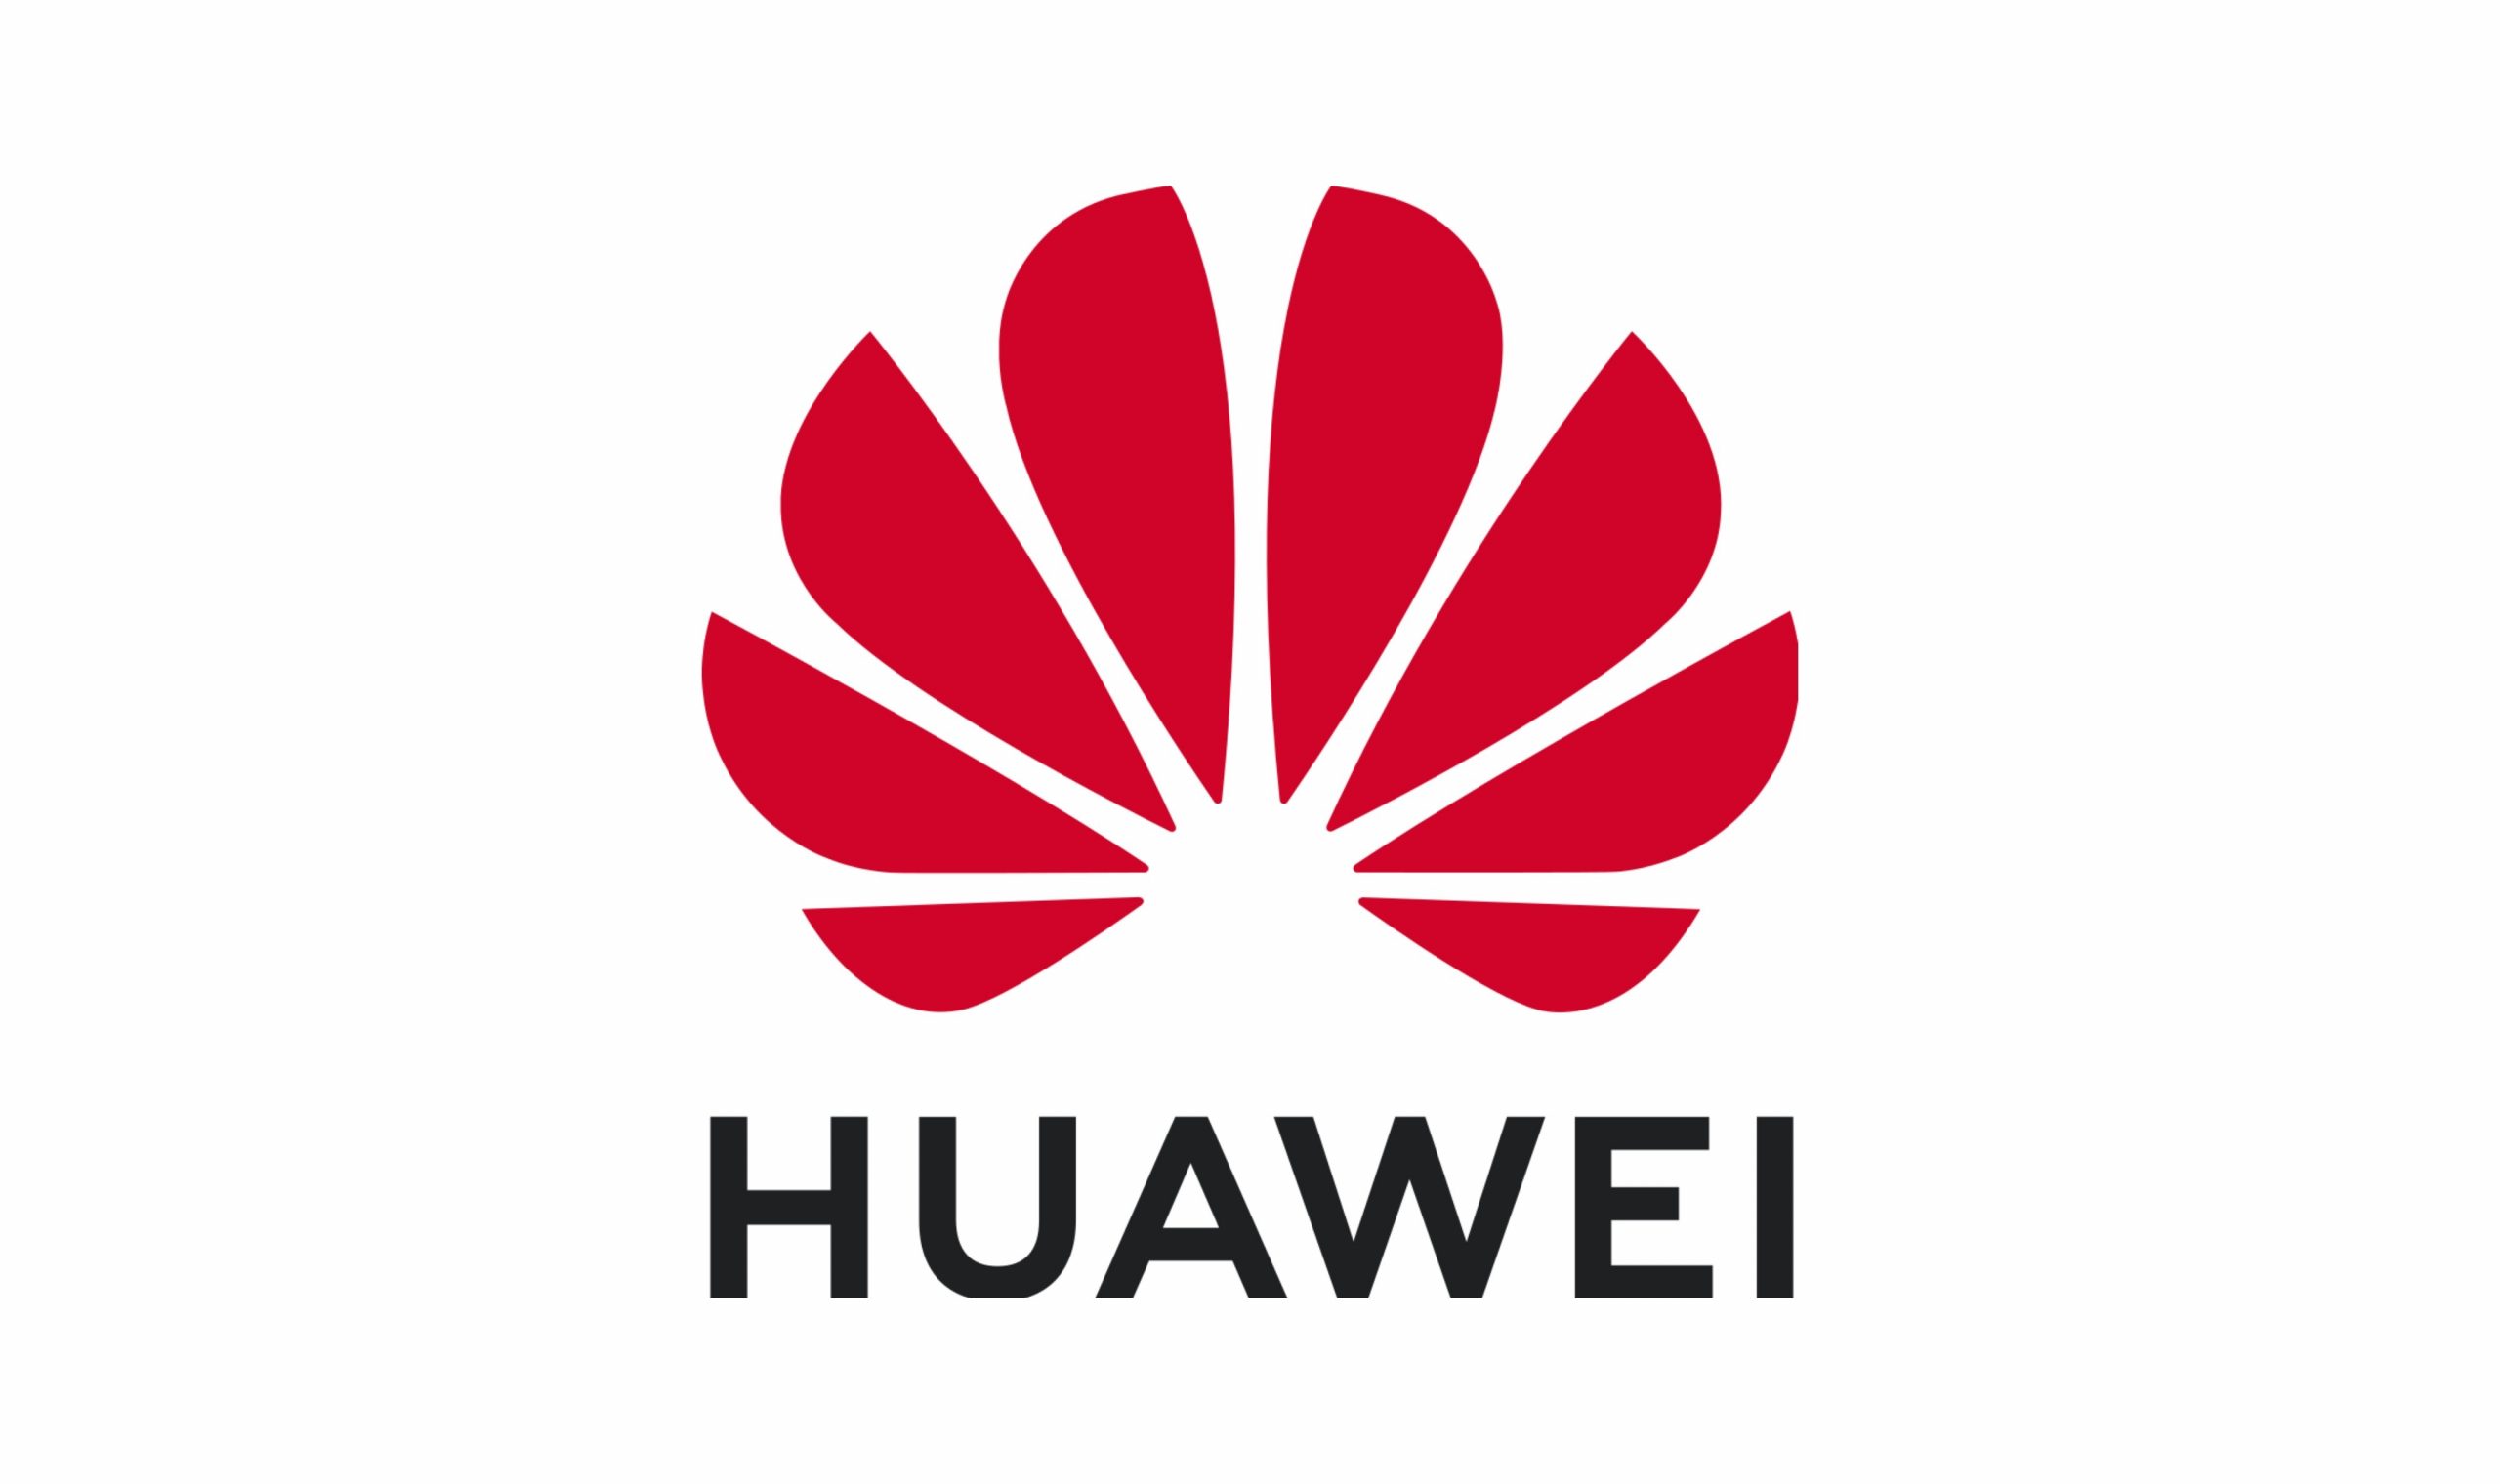 Older Huawei smartphones may no longer receive security updates and pass SafetyNet Attestation